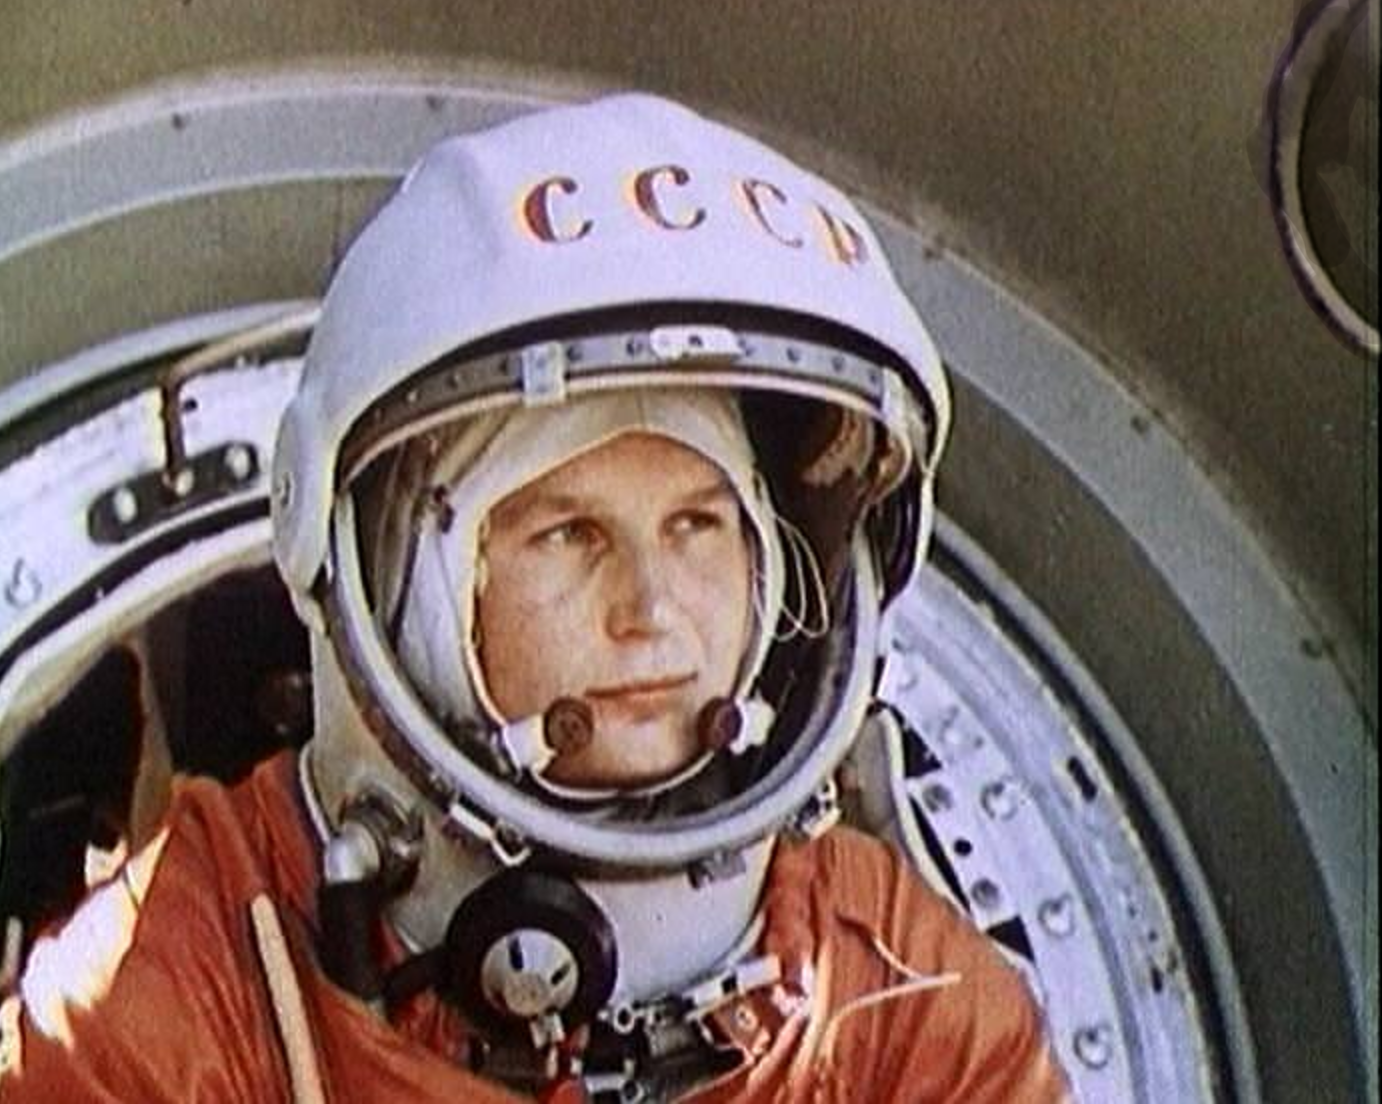 Soviet Cosmonaut Valentina Tereshkova was the first woman launched to space 50 years ago on June 16, 1963 aboard Vostok.